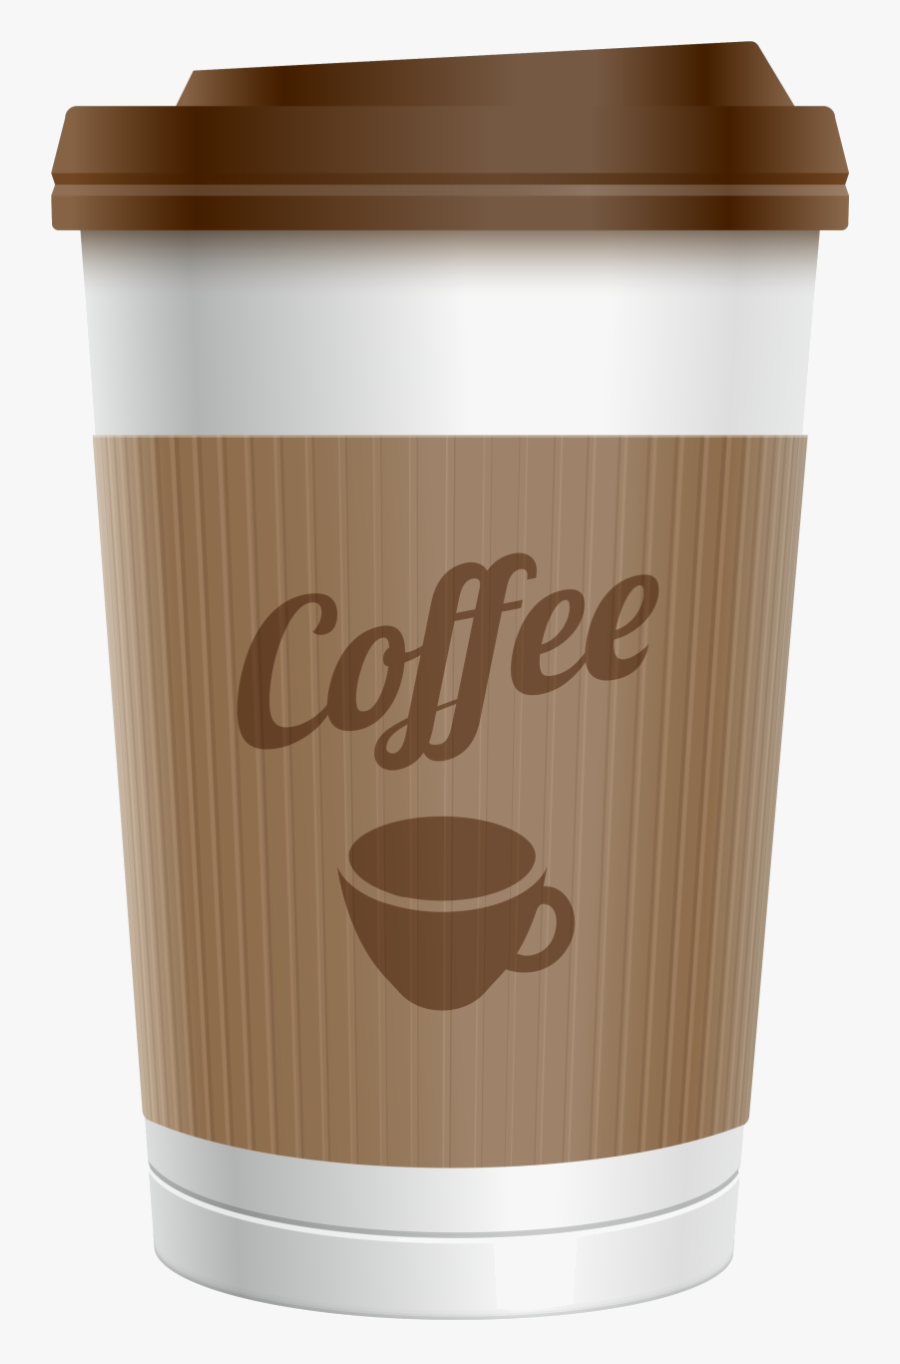 Coffee Clipart Plastic Cup Pencil And In Color Transparent - Cup, Transparent Clipart